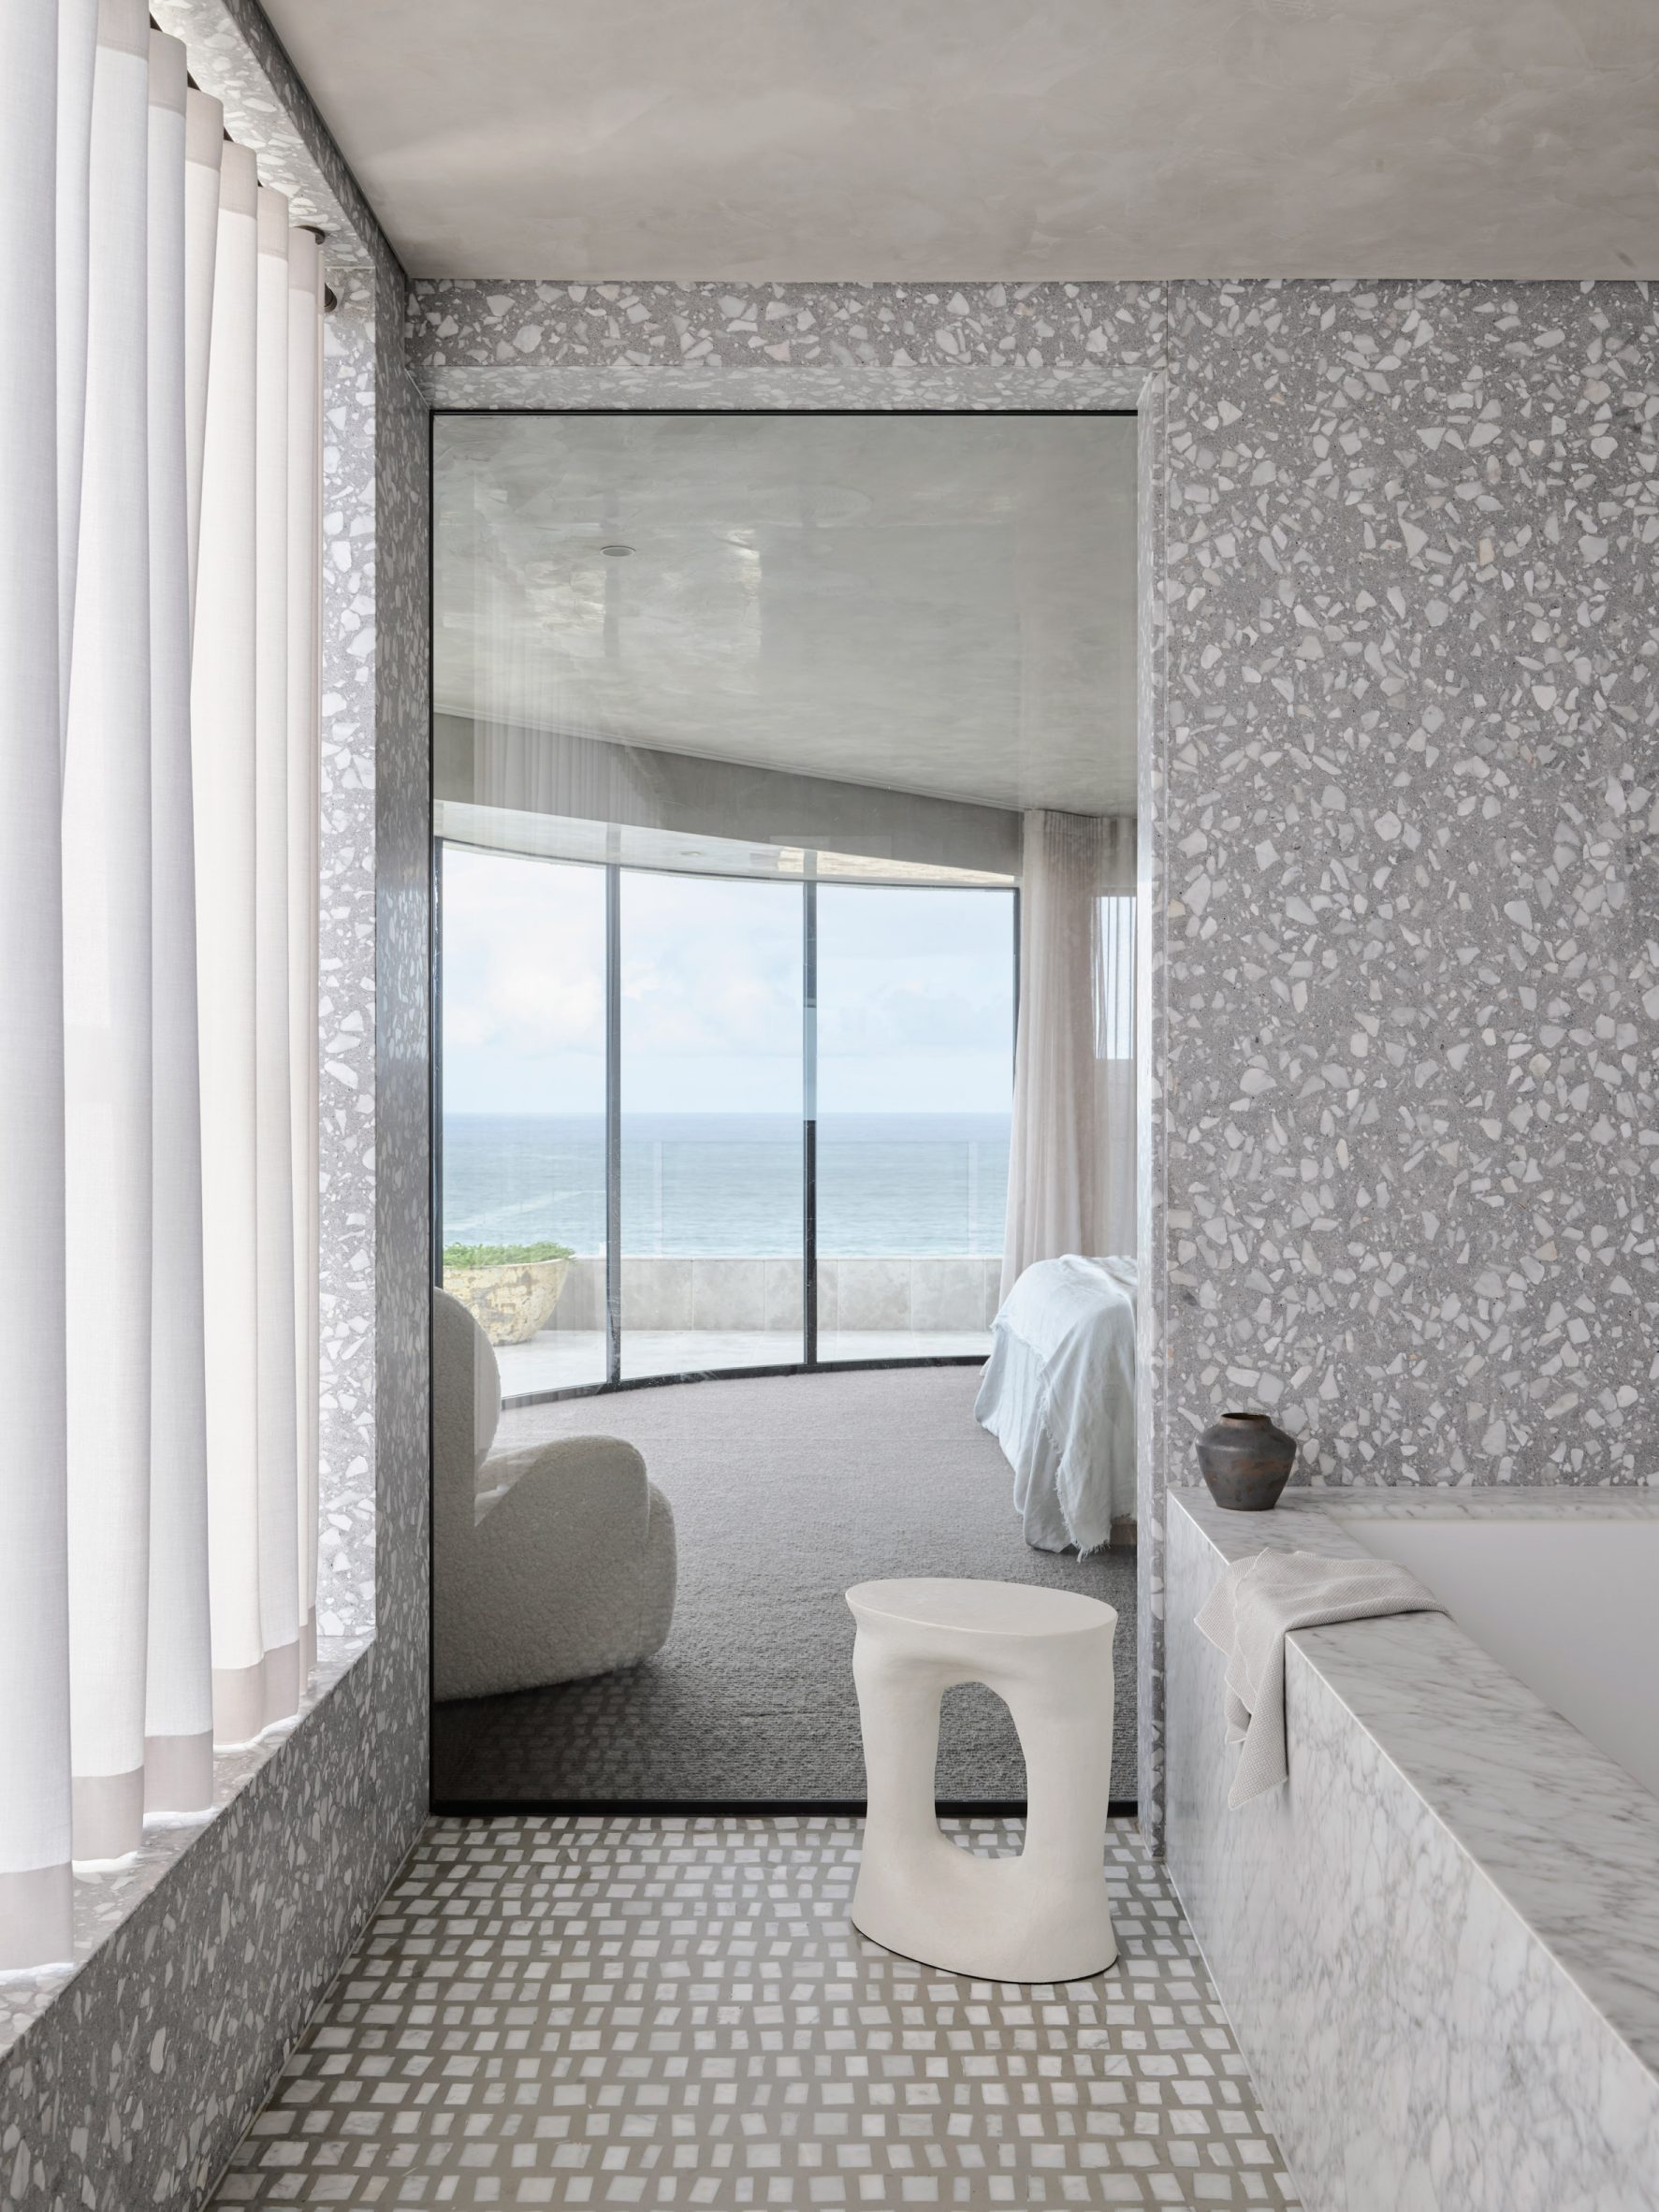 Bathroom interior by Alexander & Co with pattern-clashing greyscale surfaces